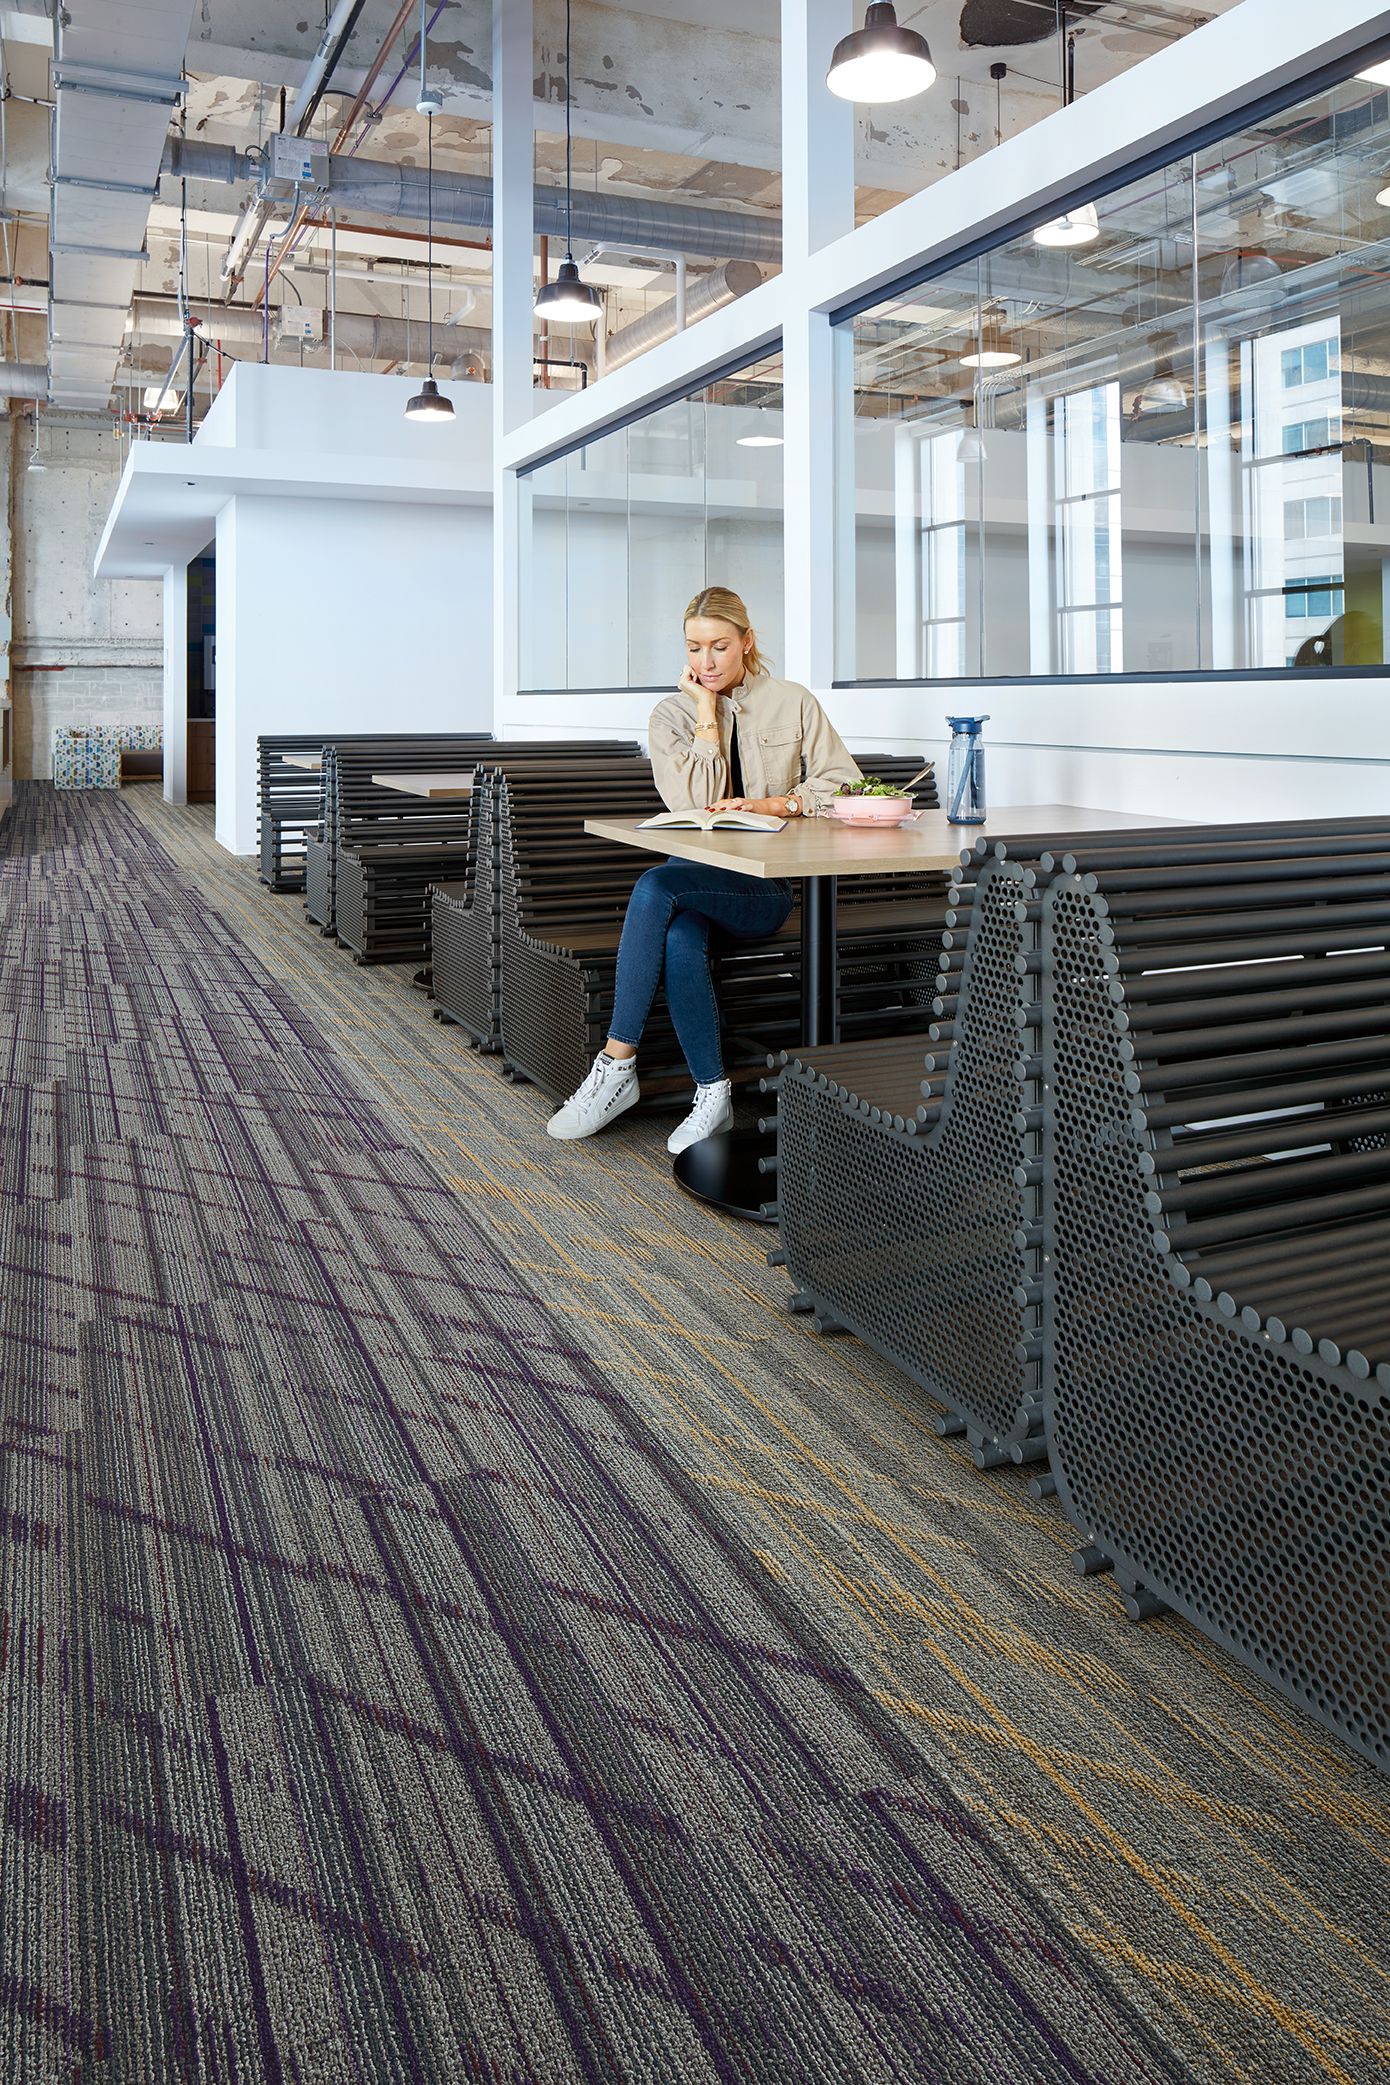 Interface Luminescent plank carpet tile in cafe area with woman seated at table numéro d’image 1